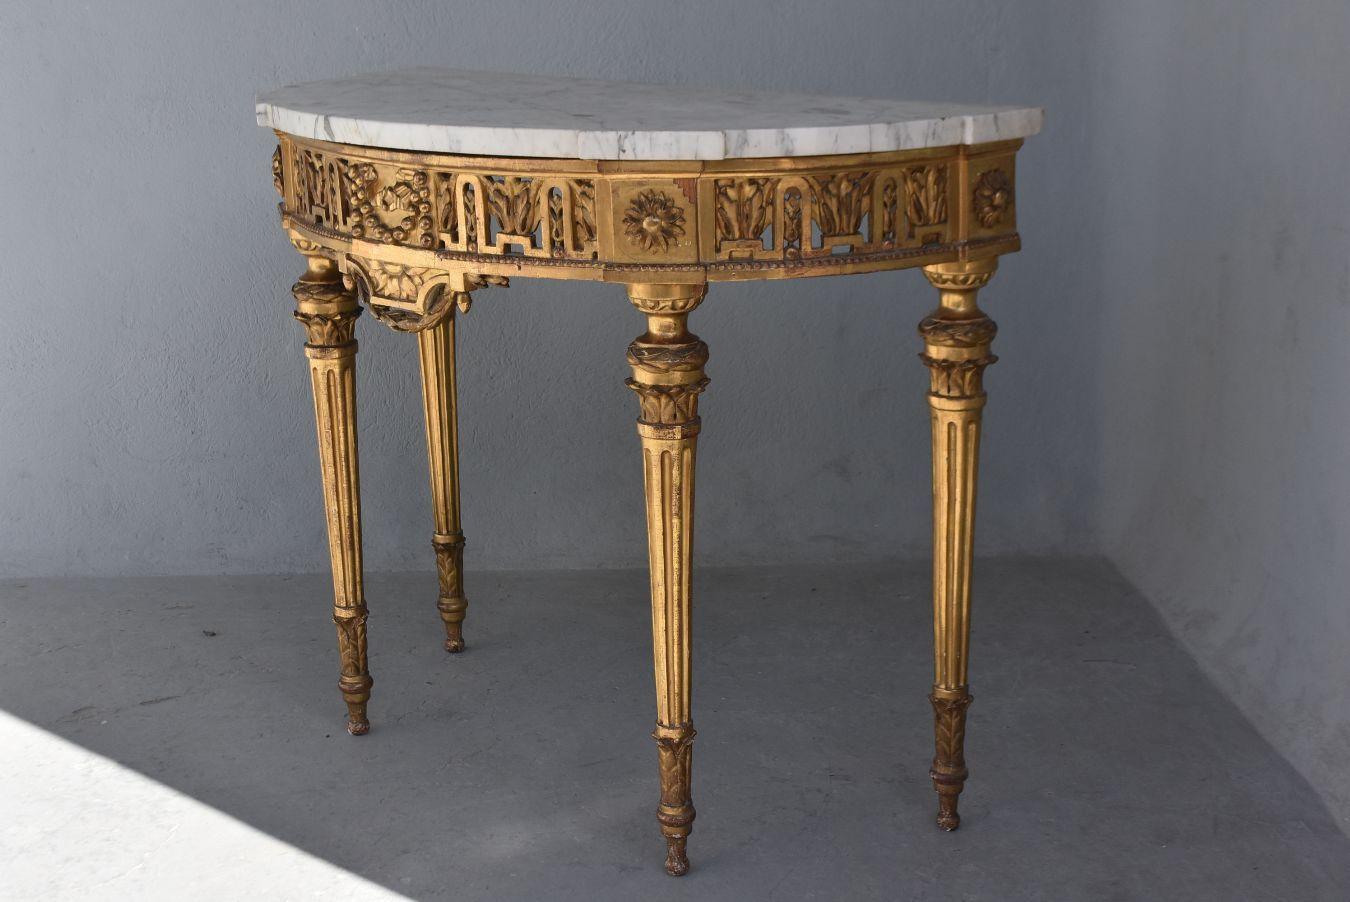 Louis XVI period console. Half moon, wooden carved and gilded white marble top. Riches openwork sculptures on the headband.